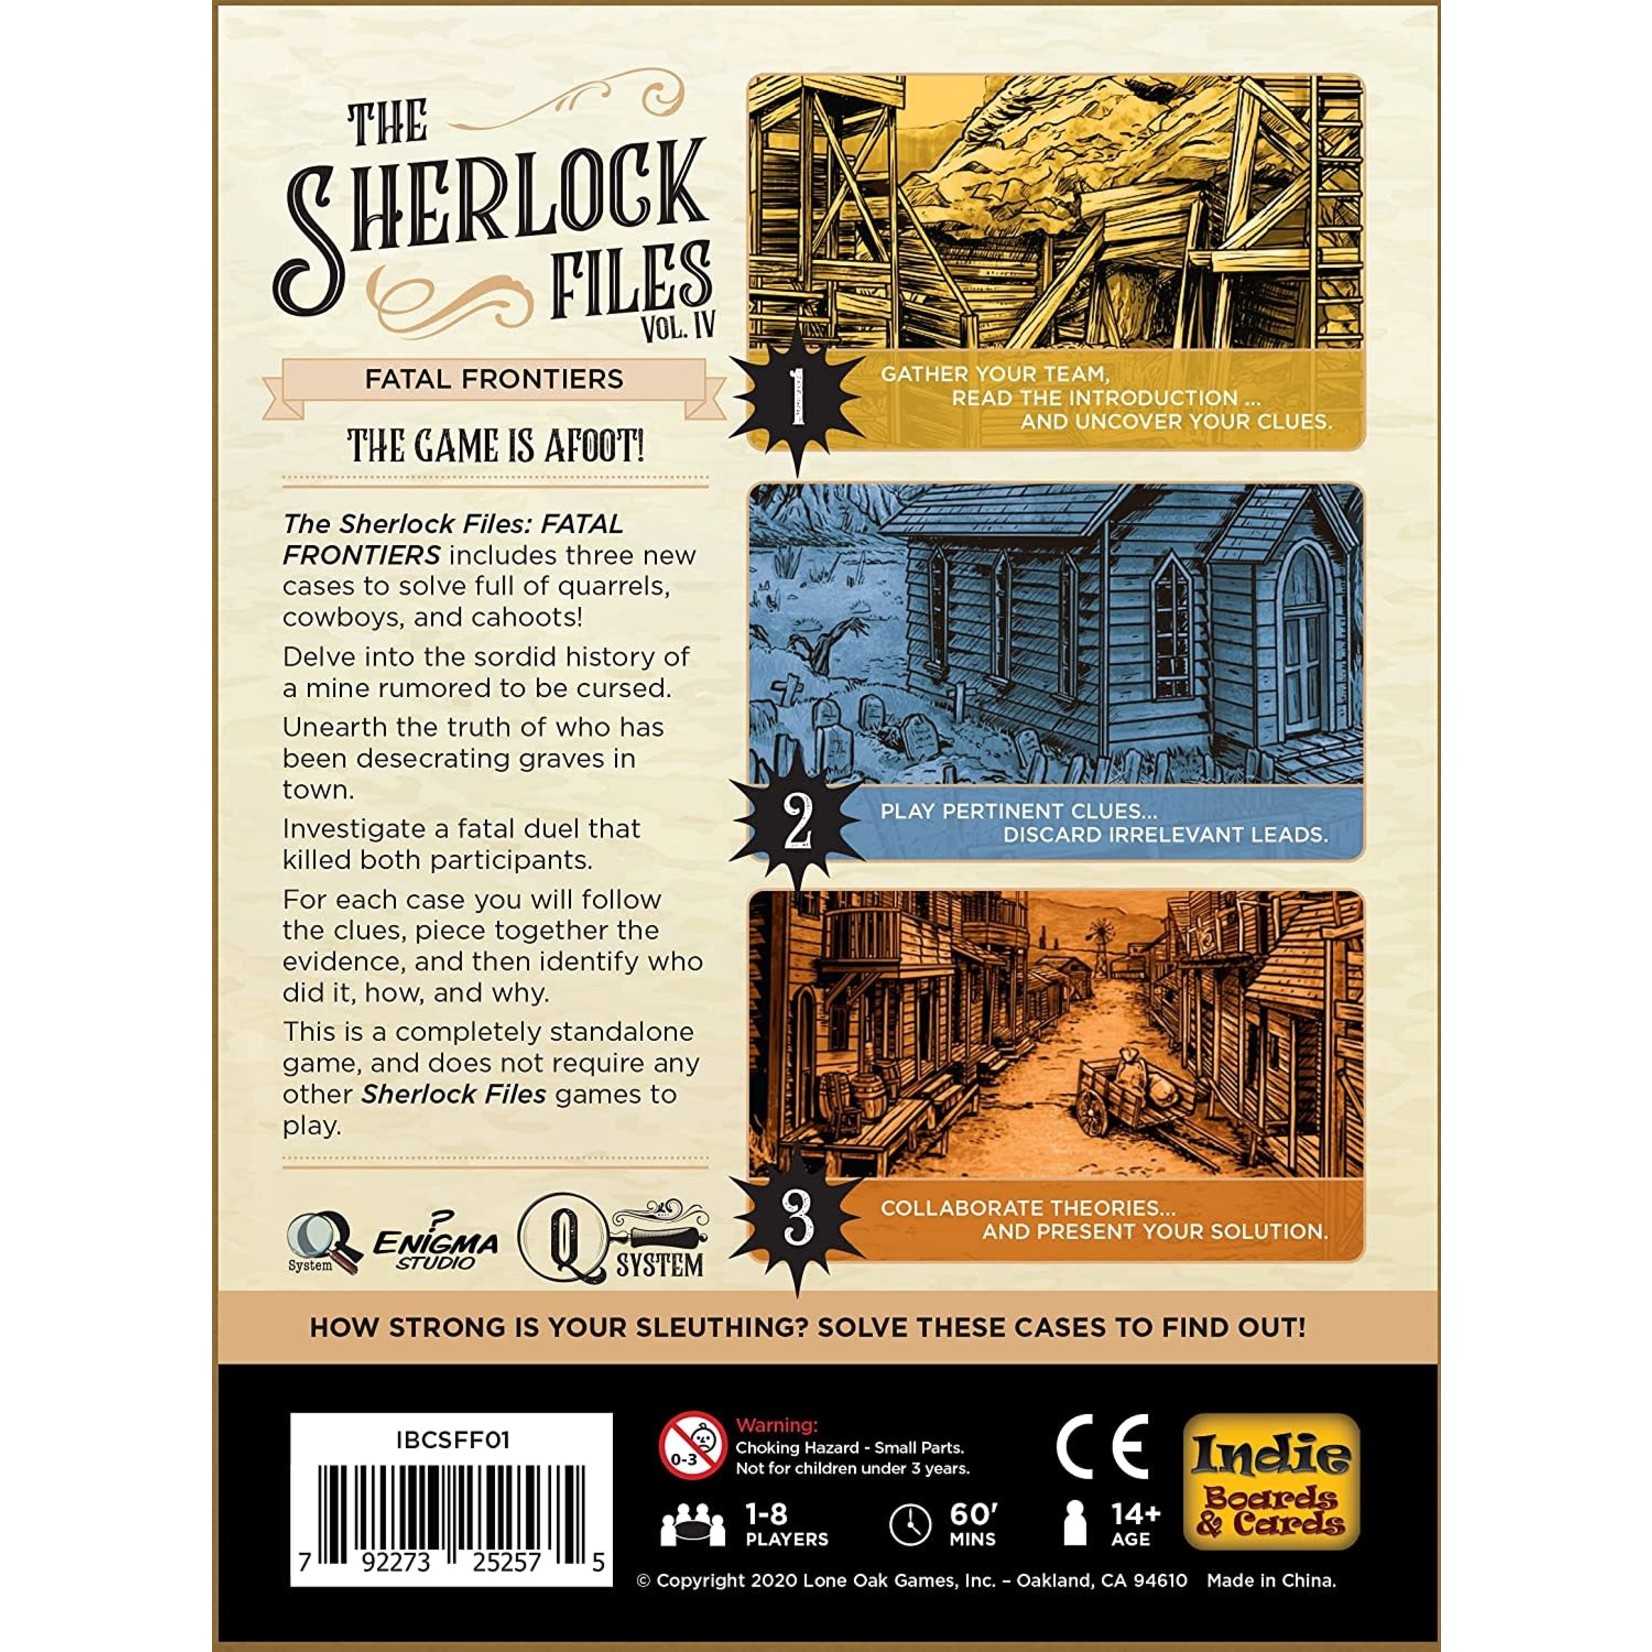 Indie Boards & Cards Sherlock Files Vol IV: Fatal Frontiers